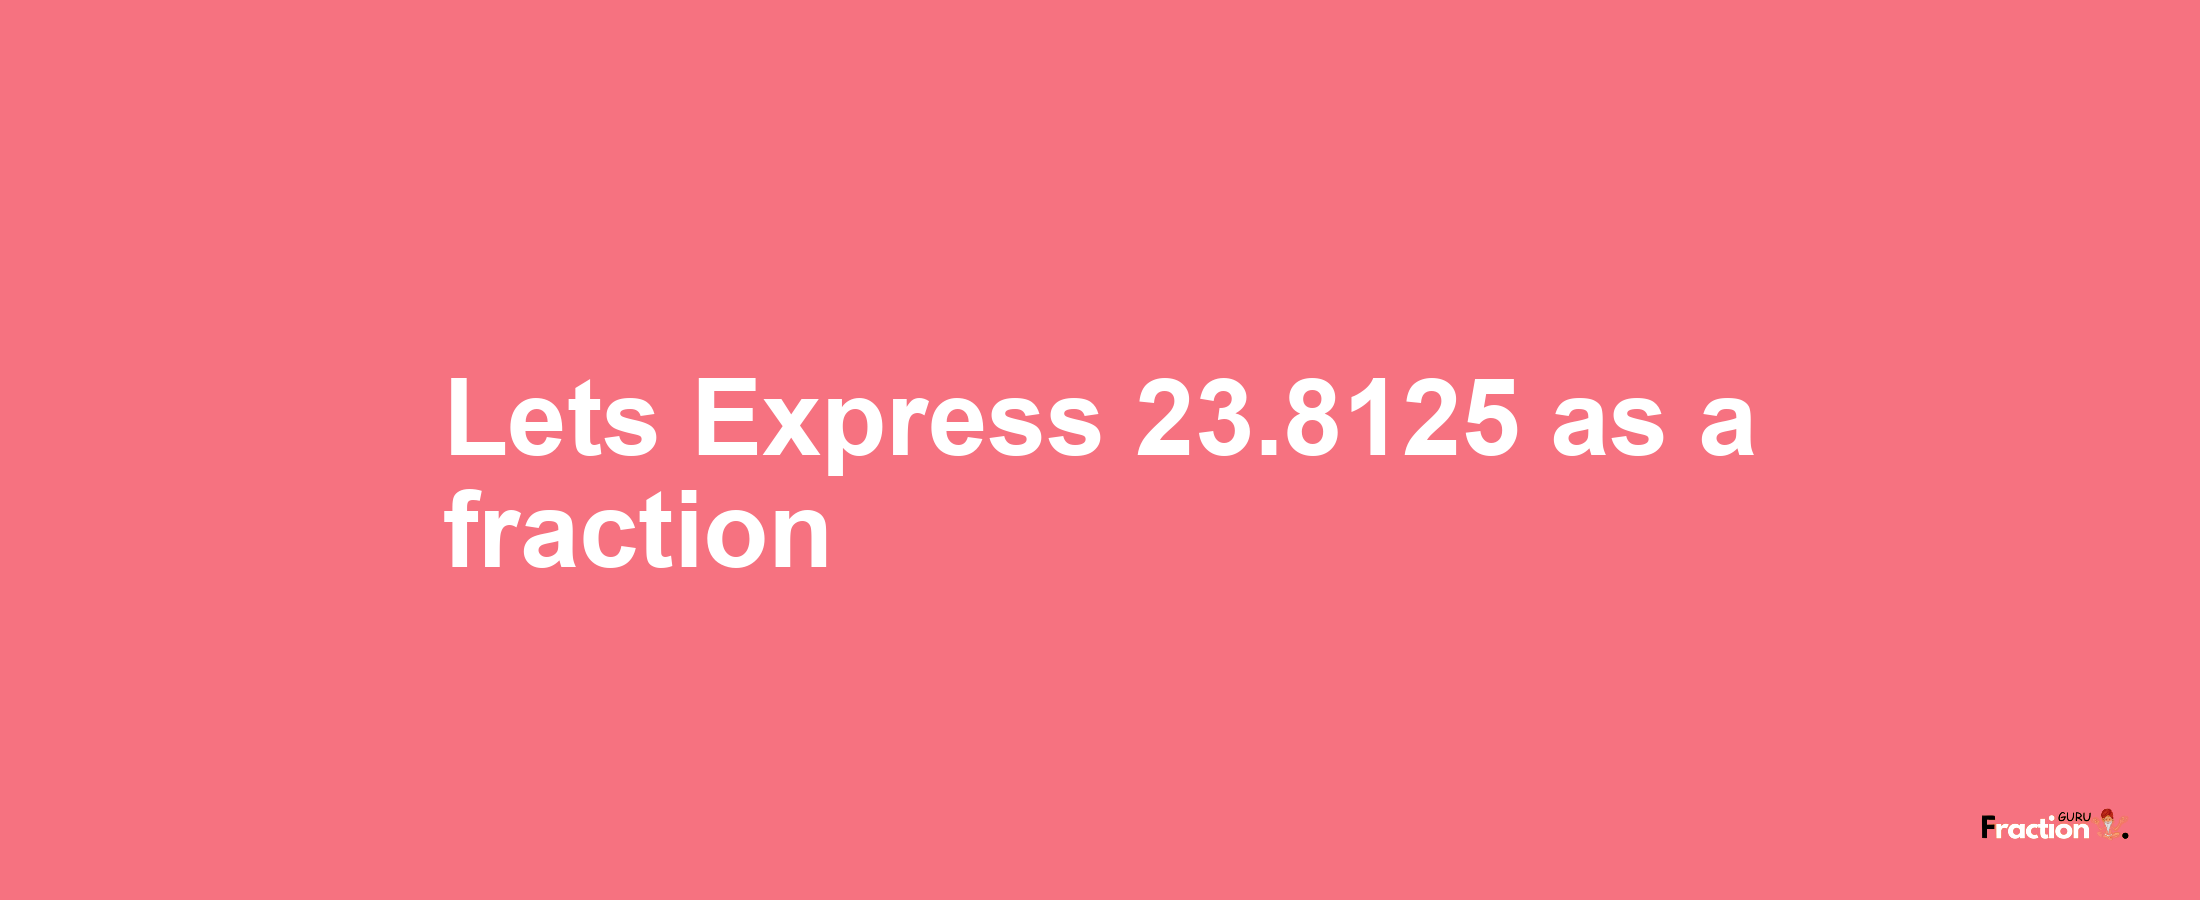 Lets Express 23.8125 as afraction